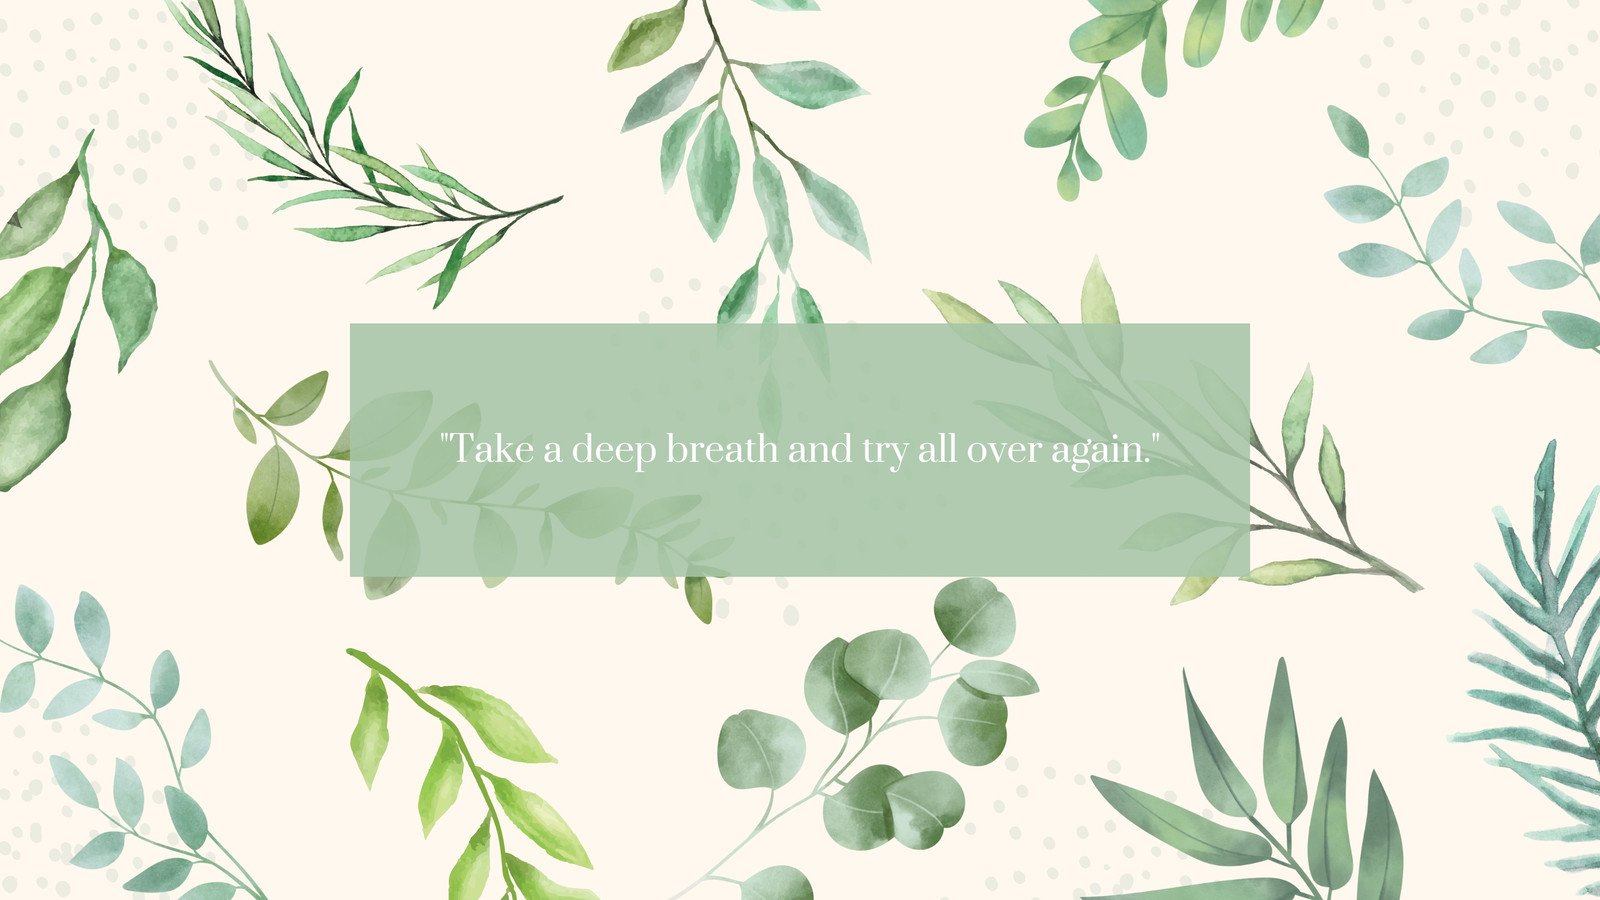 Take a deep breath and try all over again. - Sage green